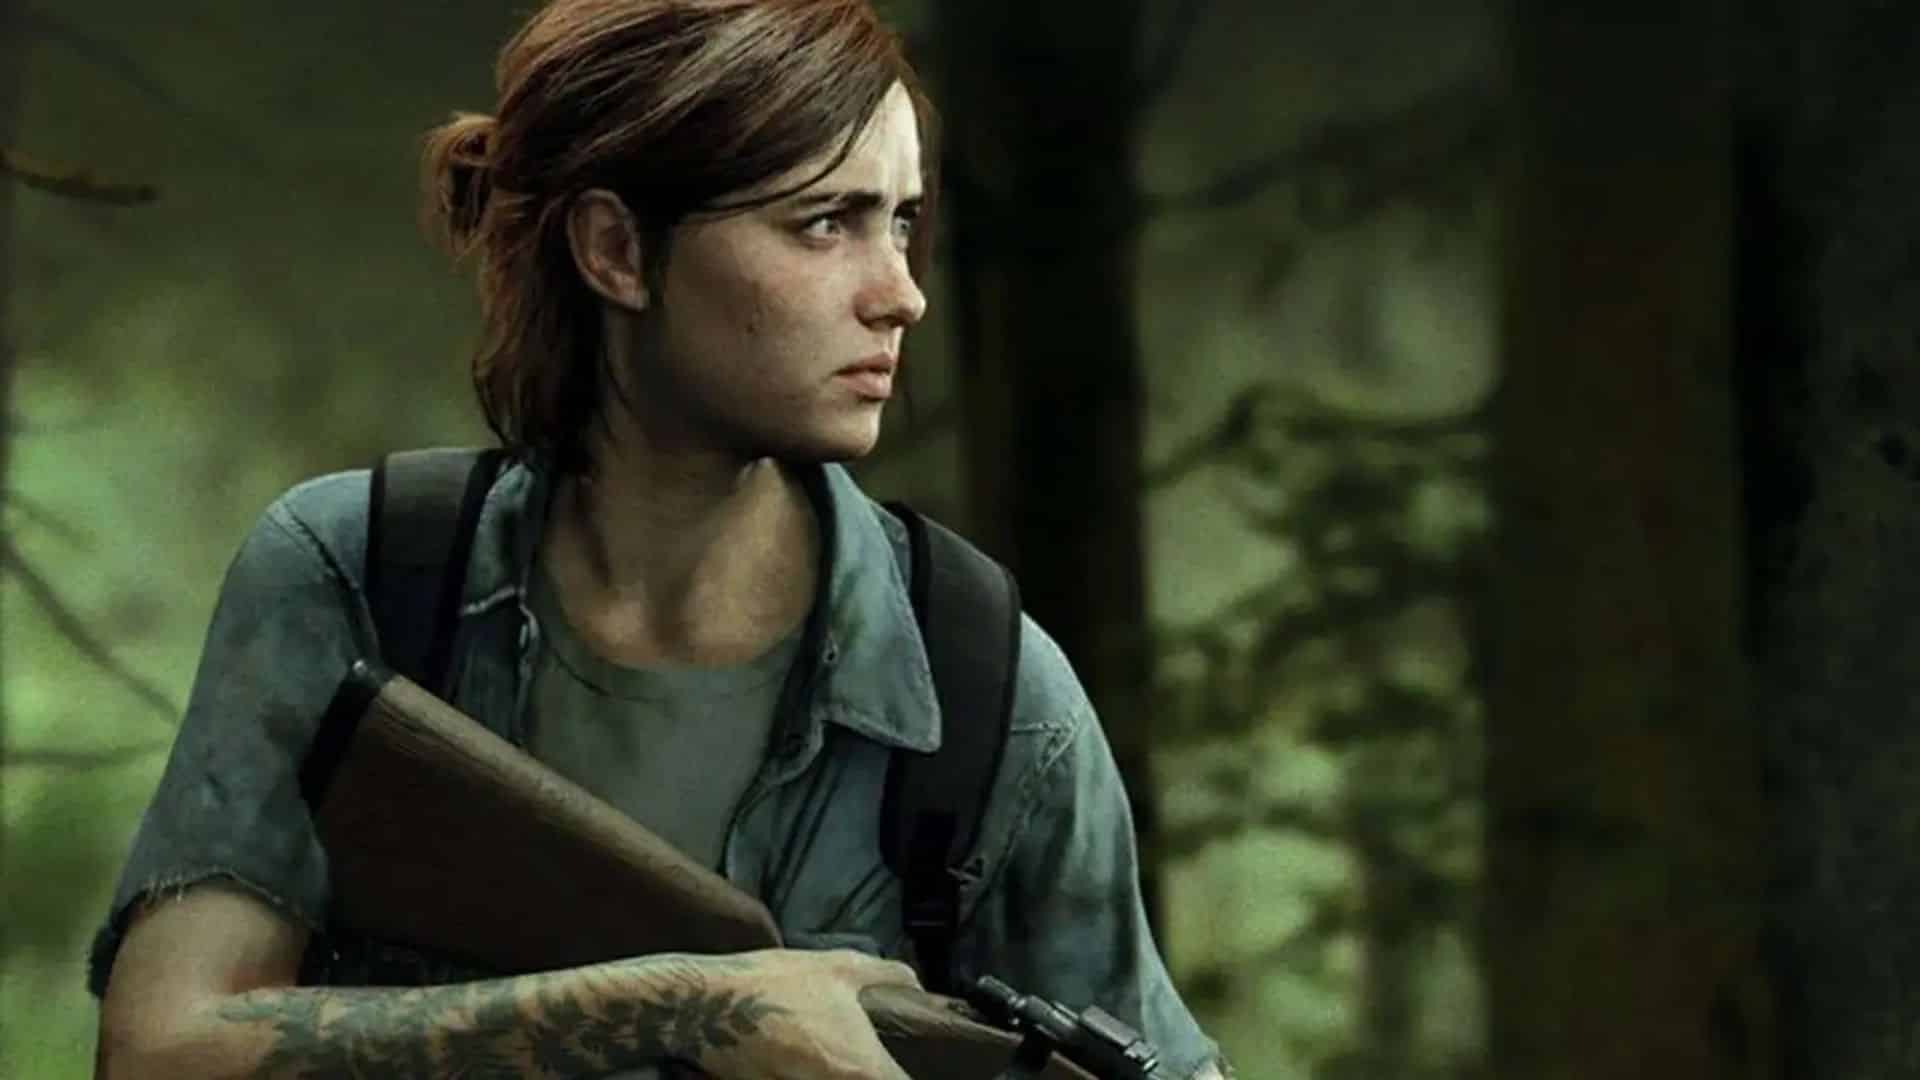 How Leaks Are Hurting the Reputation of Naughty Dog - KeenGamer